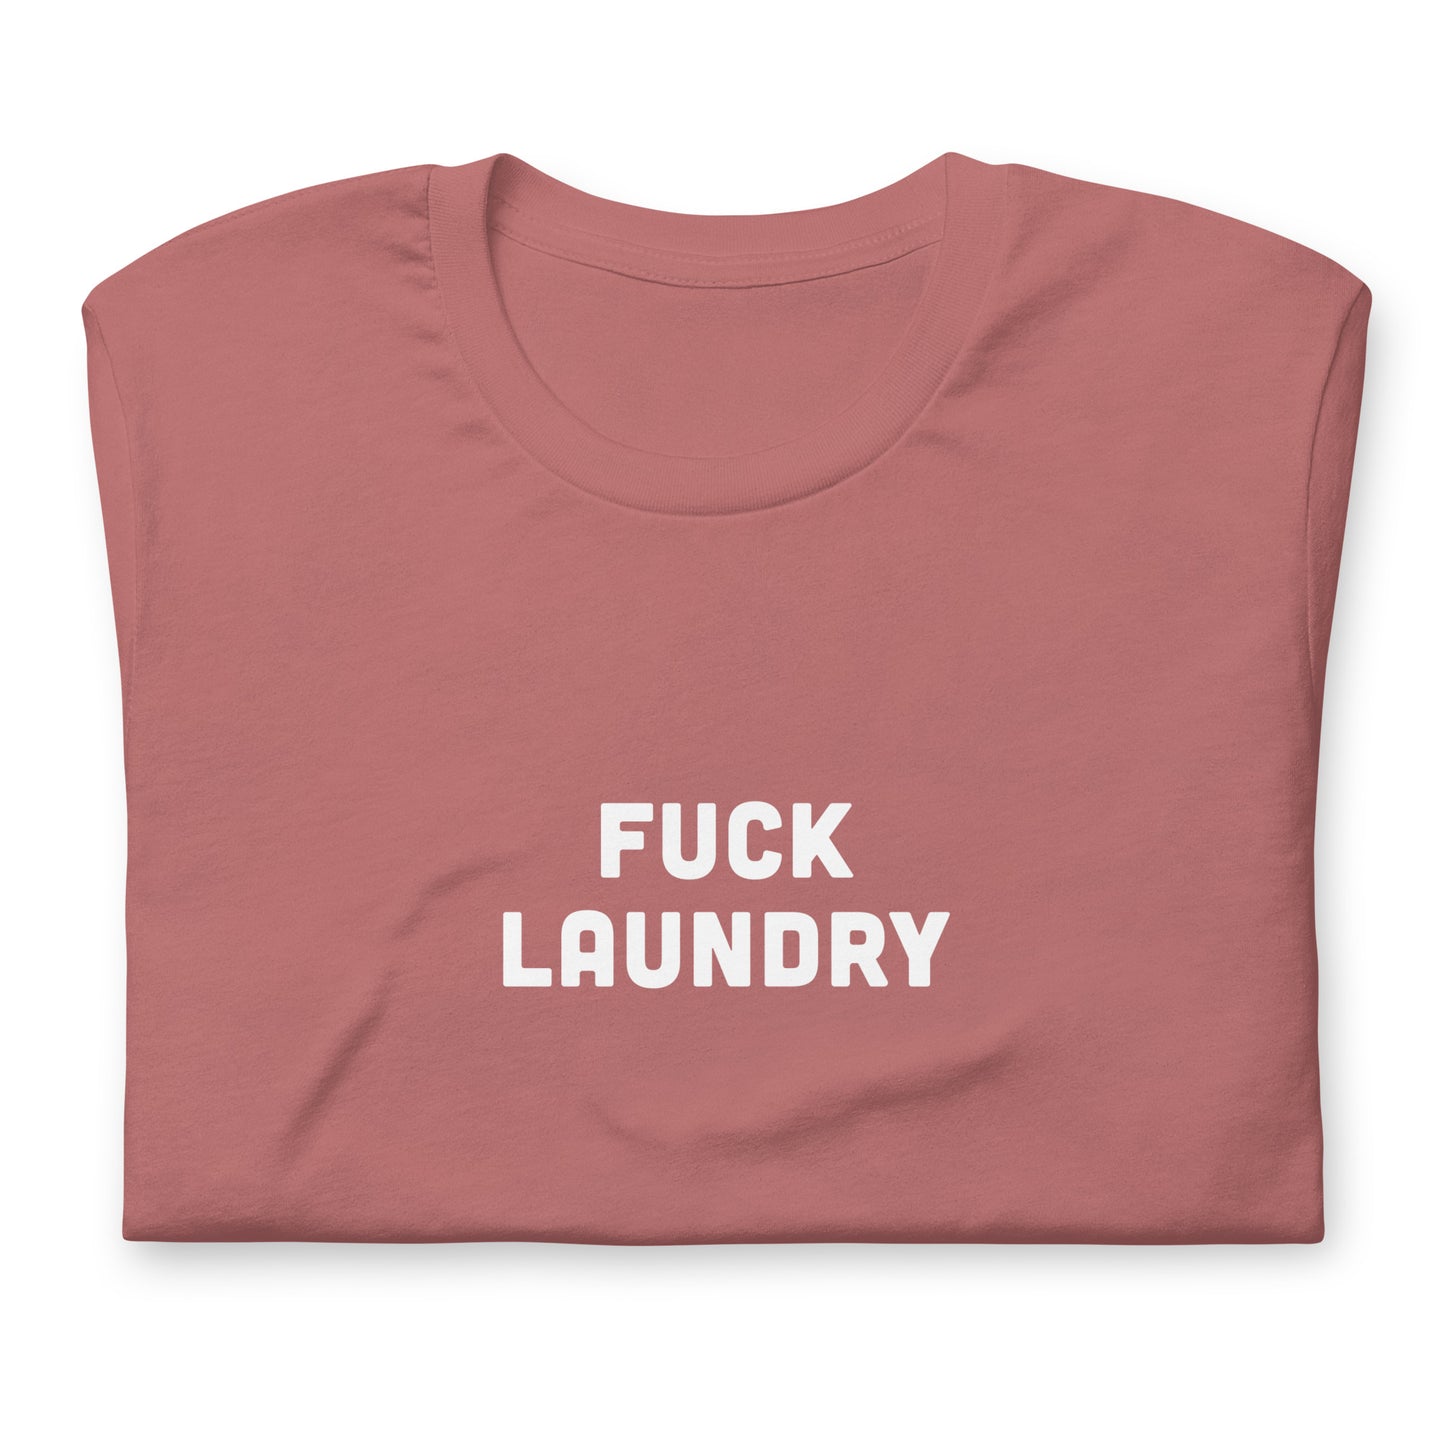 Fuck Laundry T-Shirt Size 2XL Color Navy